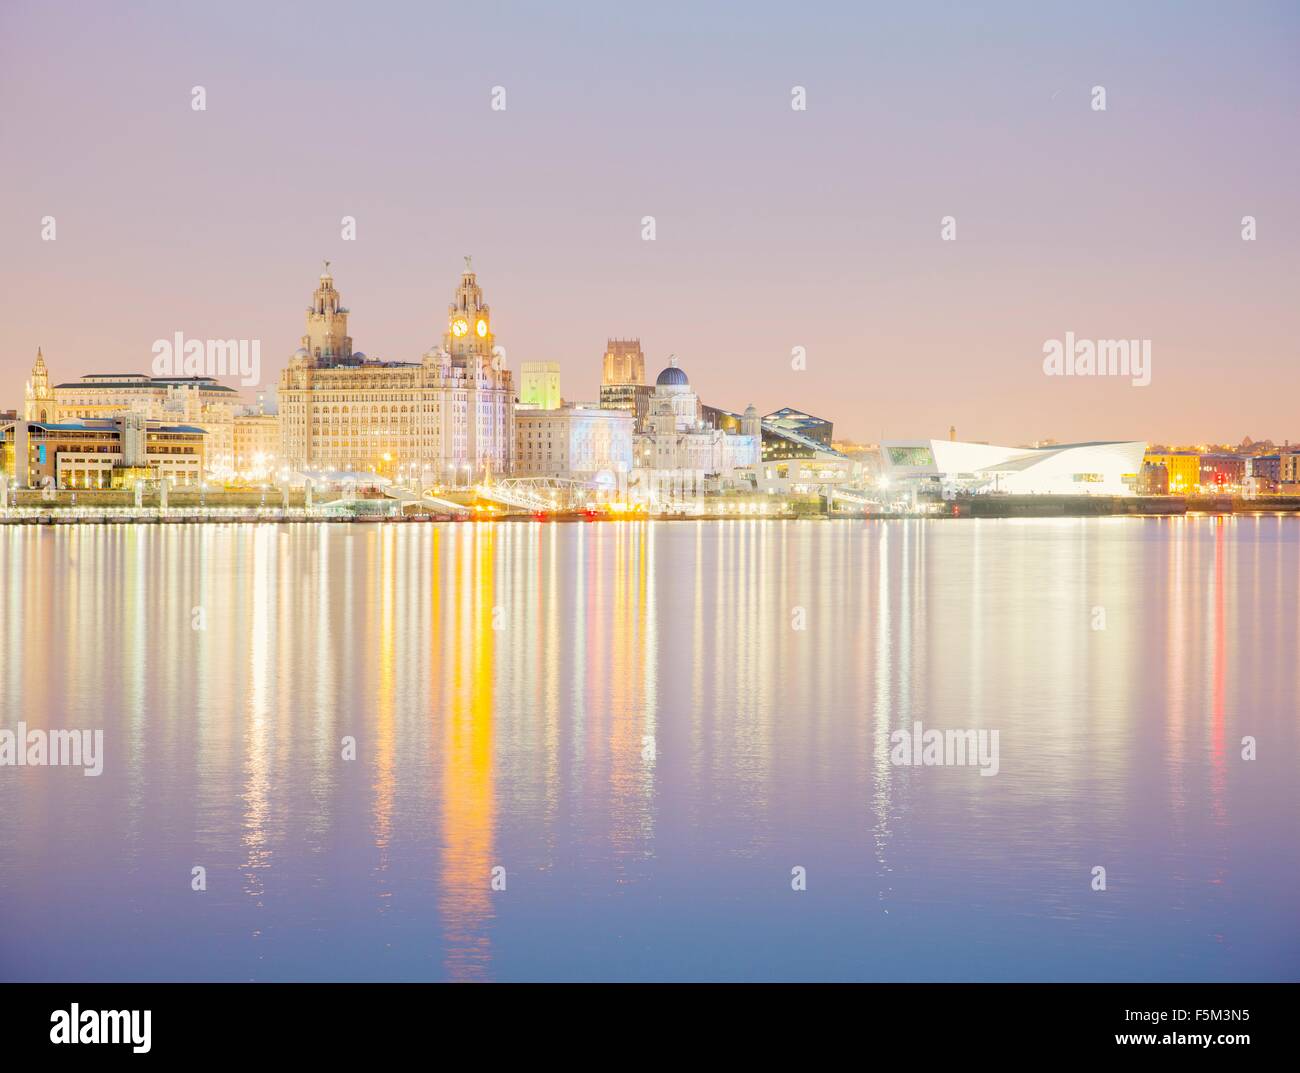 Liver building and River Mersey at dusk, Liverpool, England, UK Stock Photo